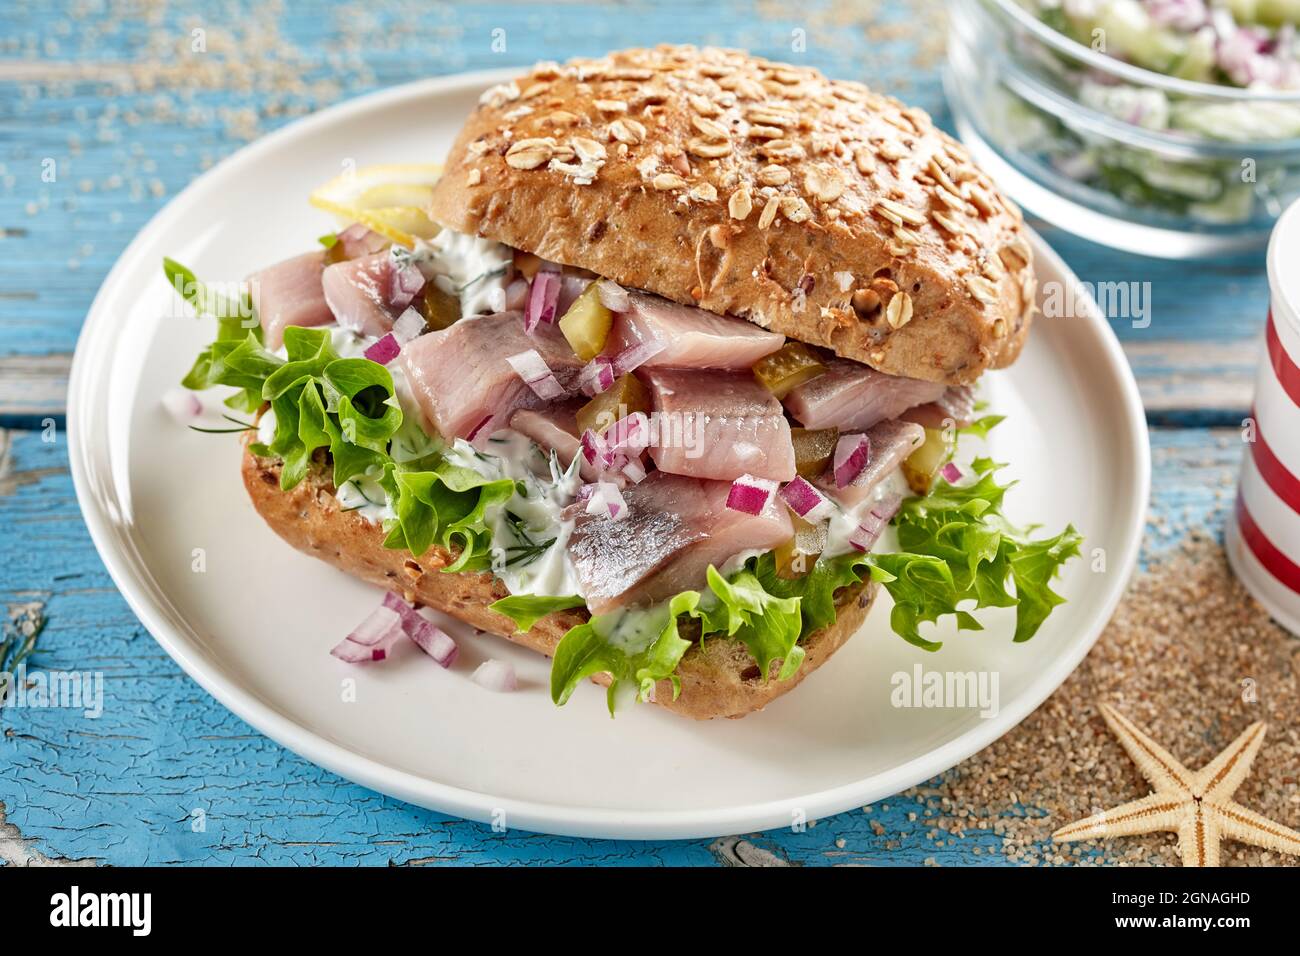 From above of nutritious sandwich bun with herring and pickles served on plate on wooden table decorated in marine style Stock Photo